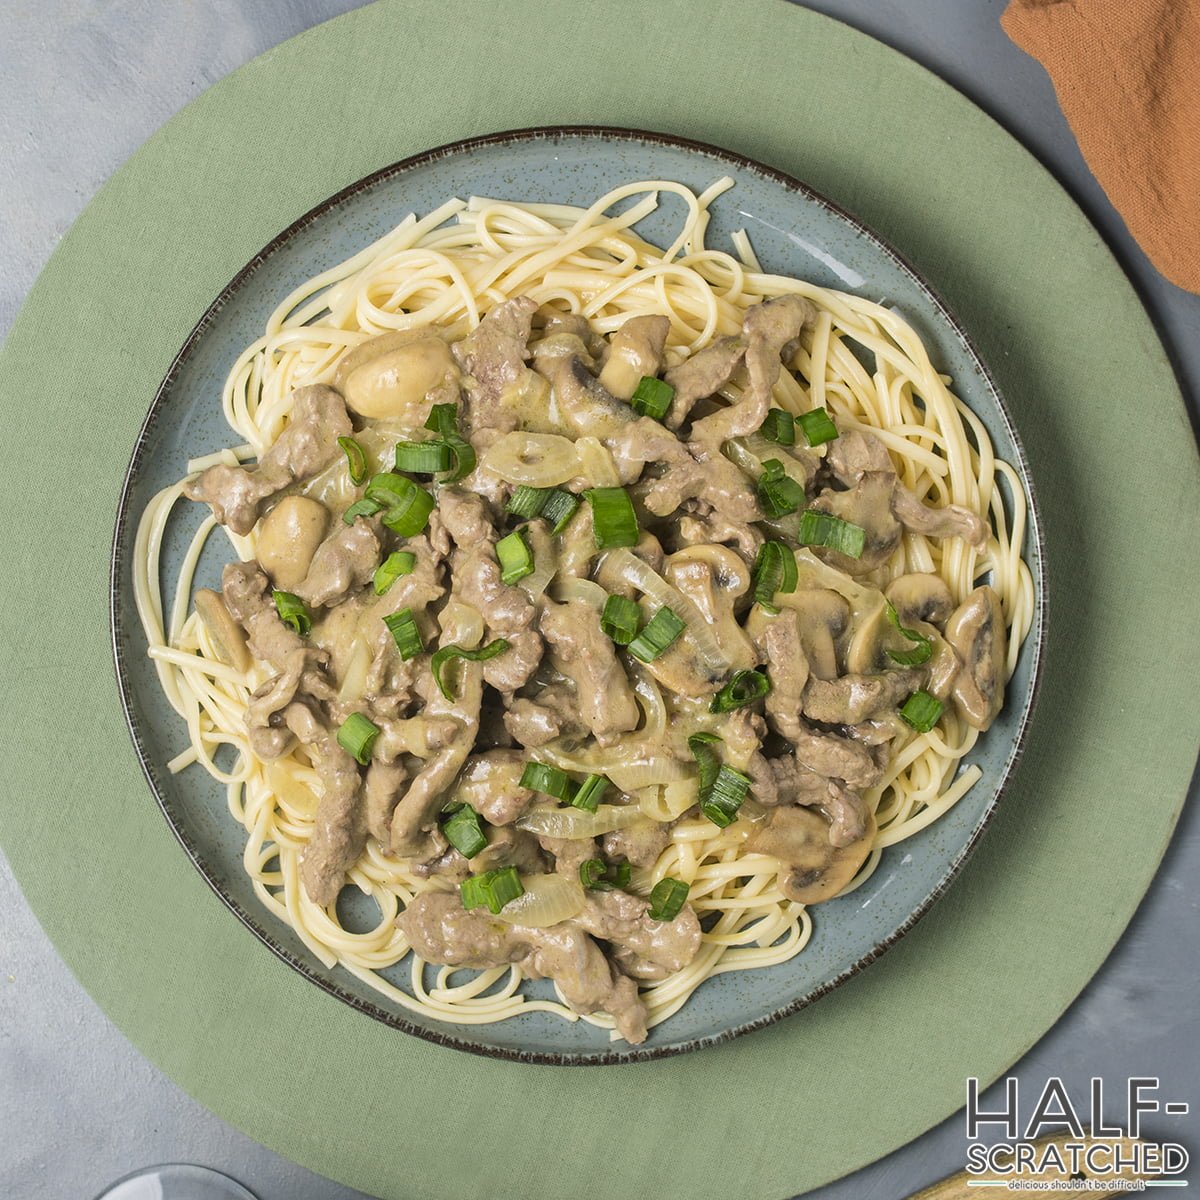 A plate with Beef Stroganoff